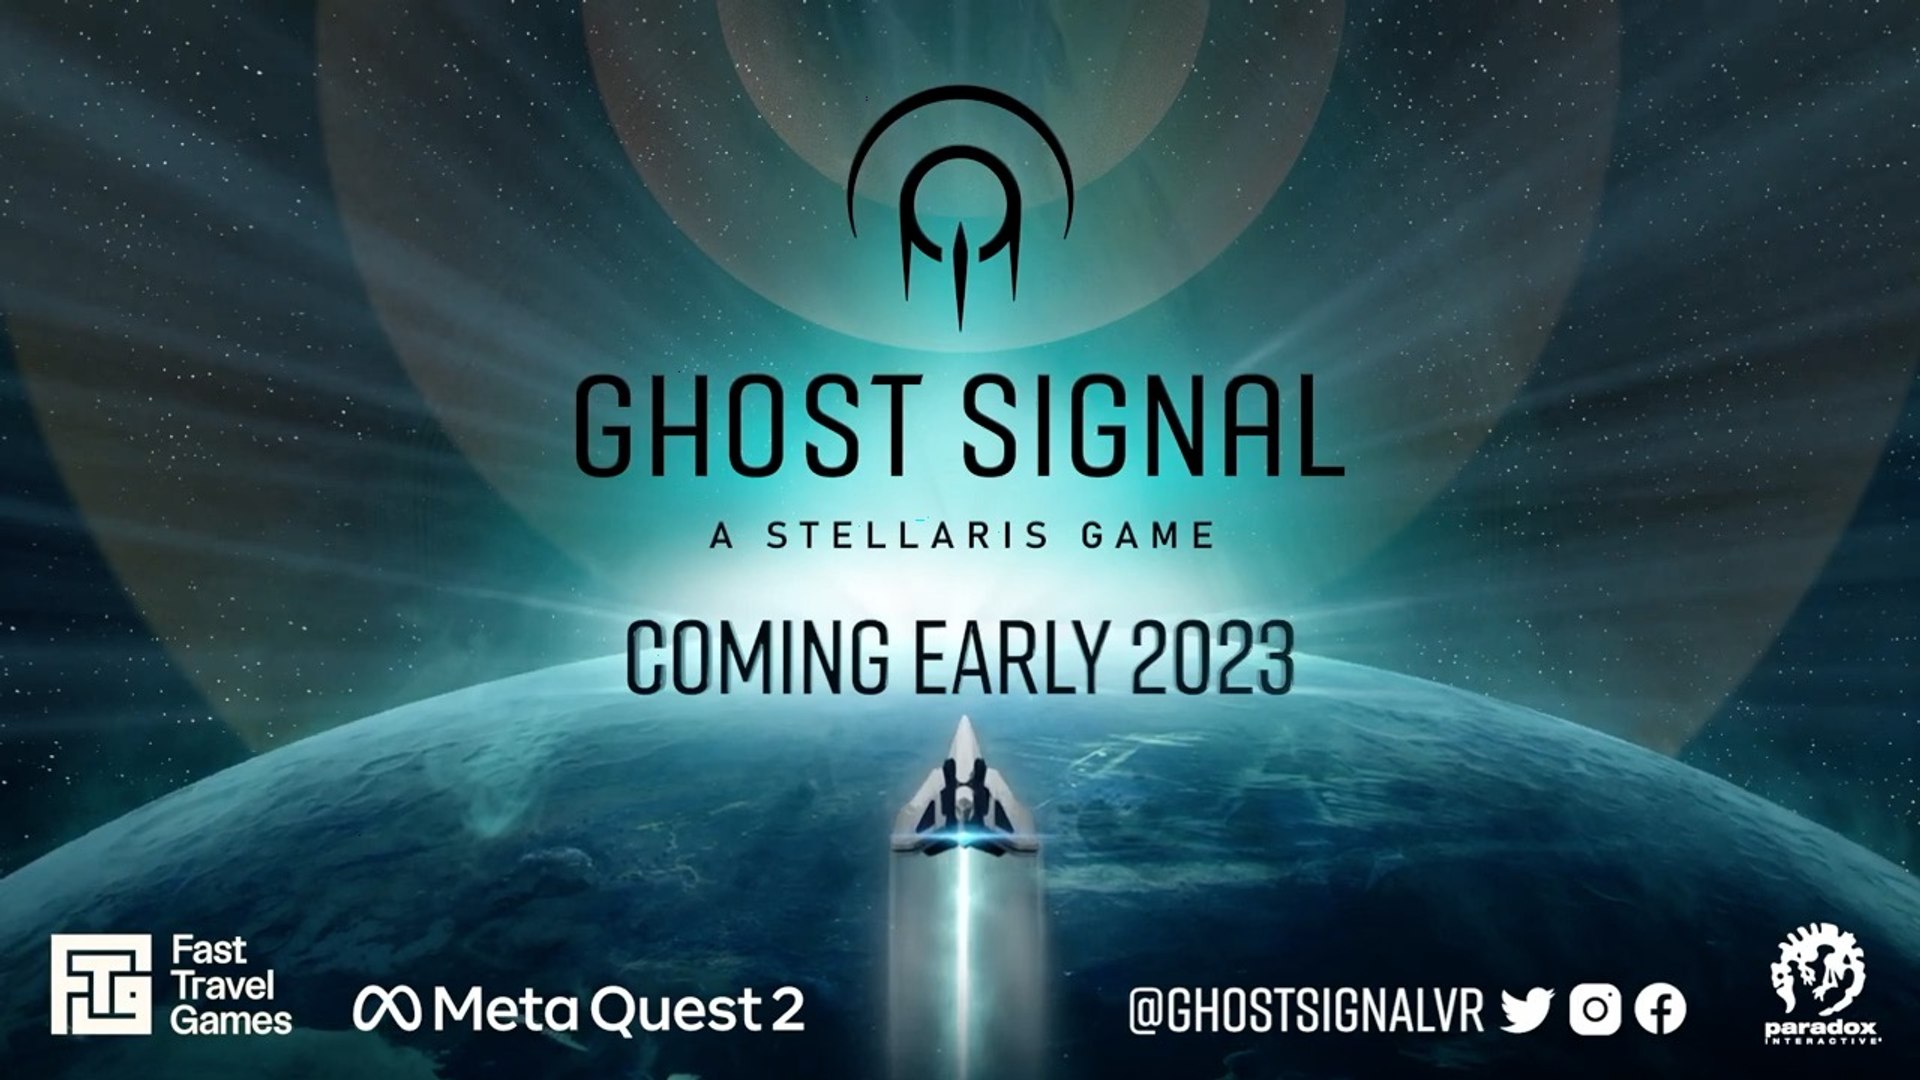 Coming in 2023 from Paradox Interactive 